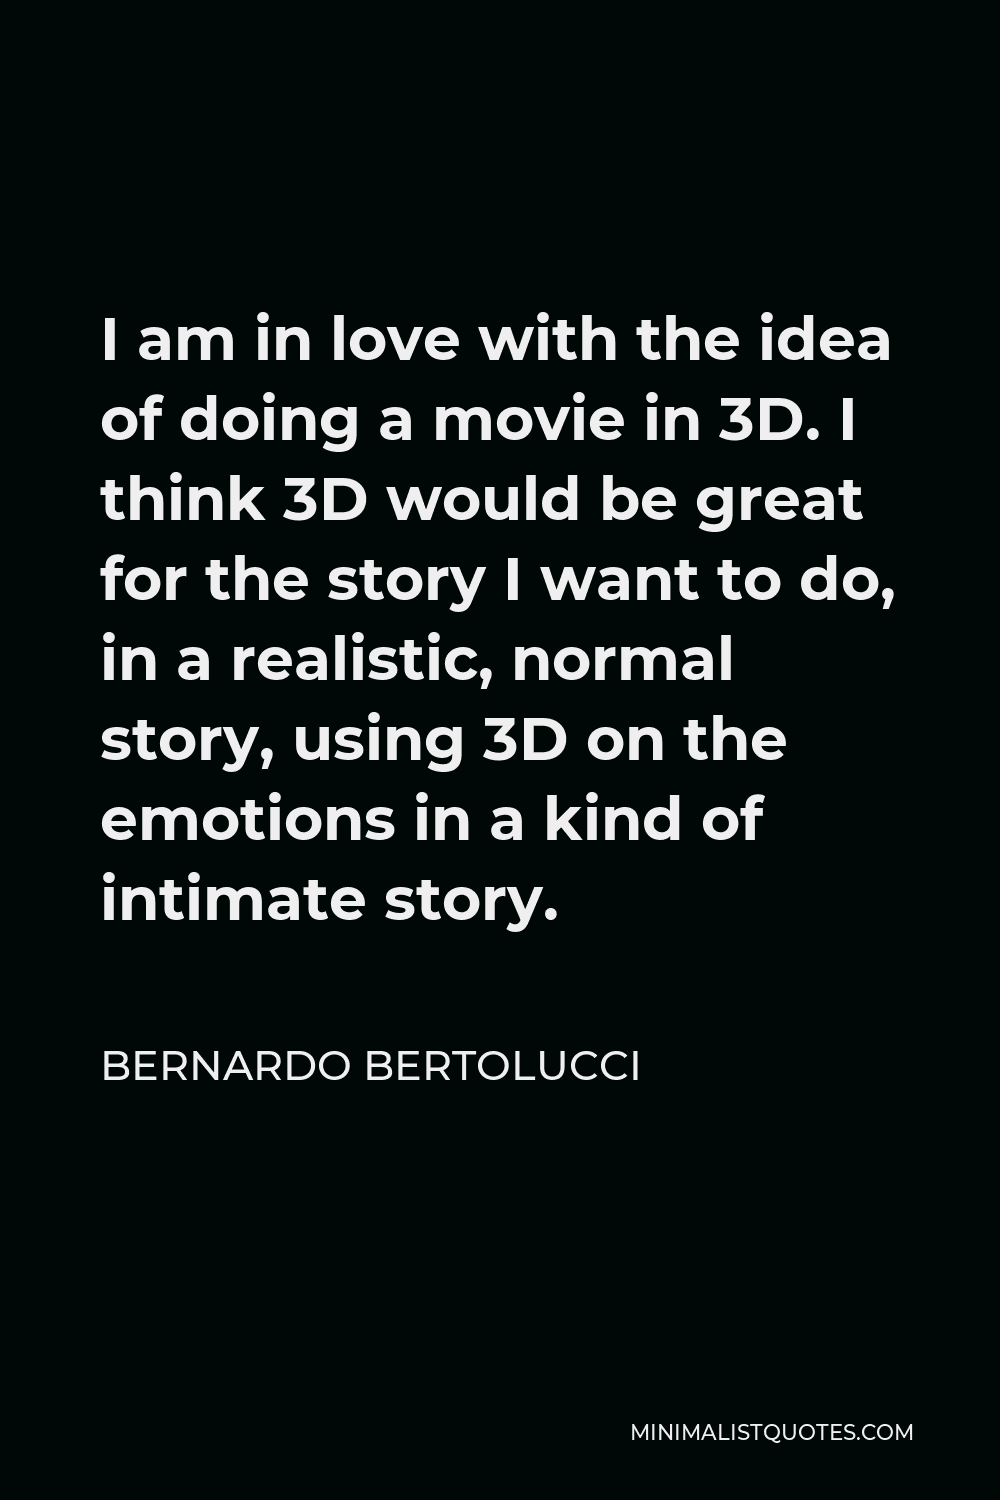 Bernardo Bertolucci Quote - I am in love with the idea of doing a movie in 3D. I think 3D would be great for the story I want to do, in a realistic, normal story, using 3D on the emotions in a kind of intimate story.